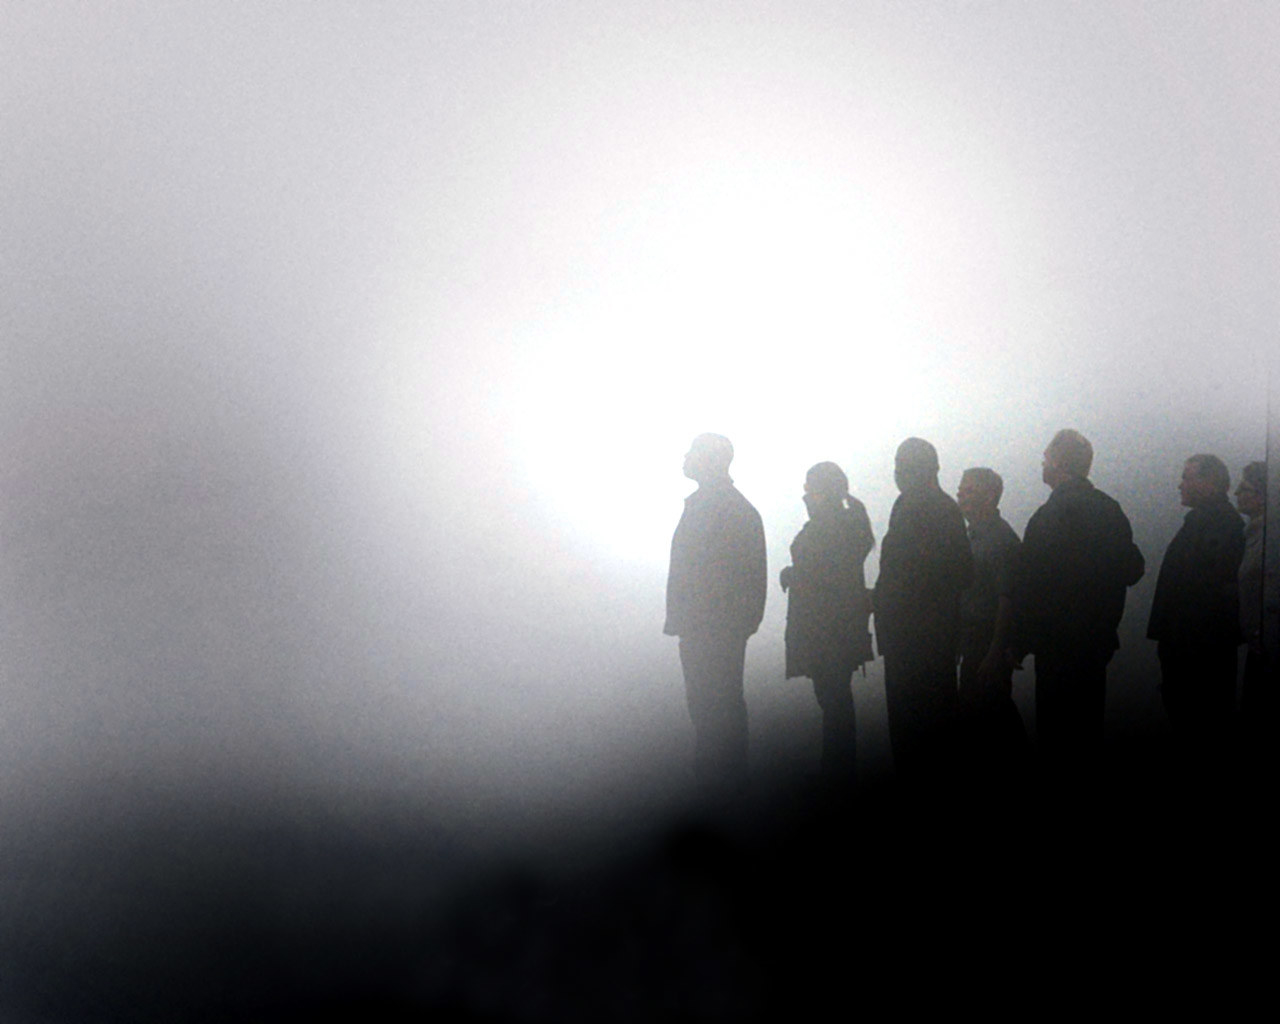 The group within the mist